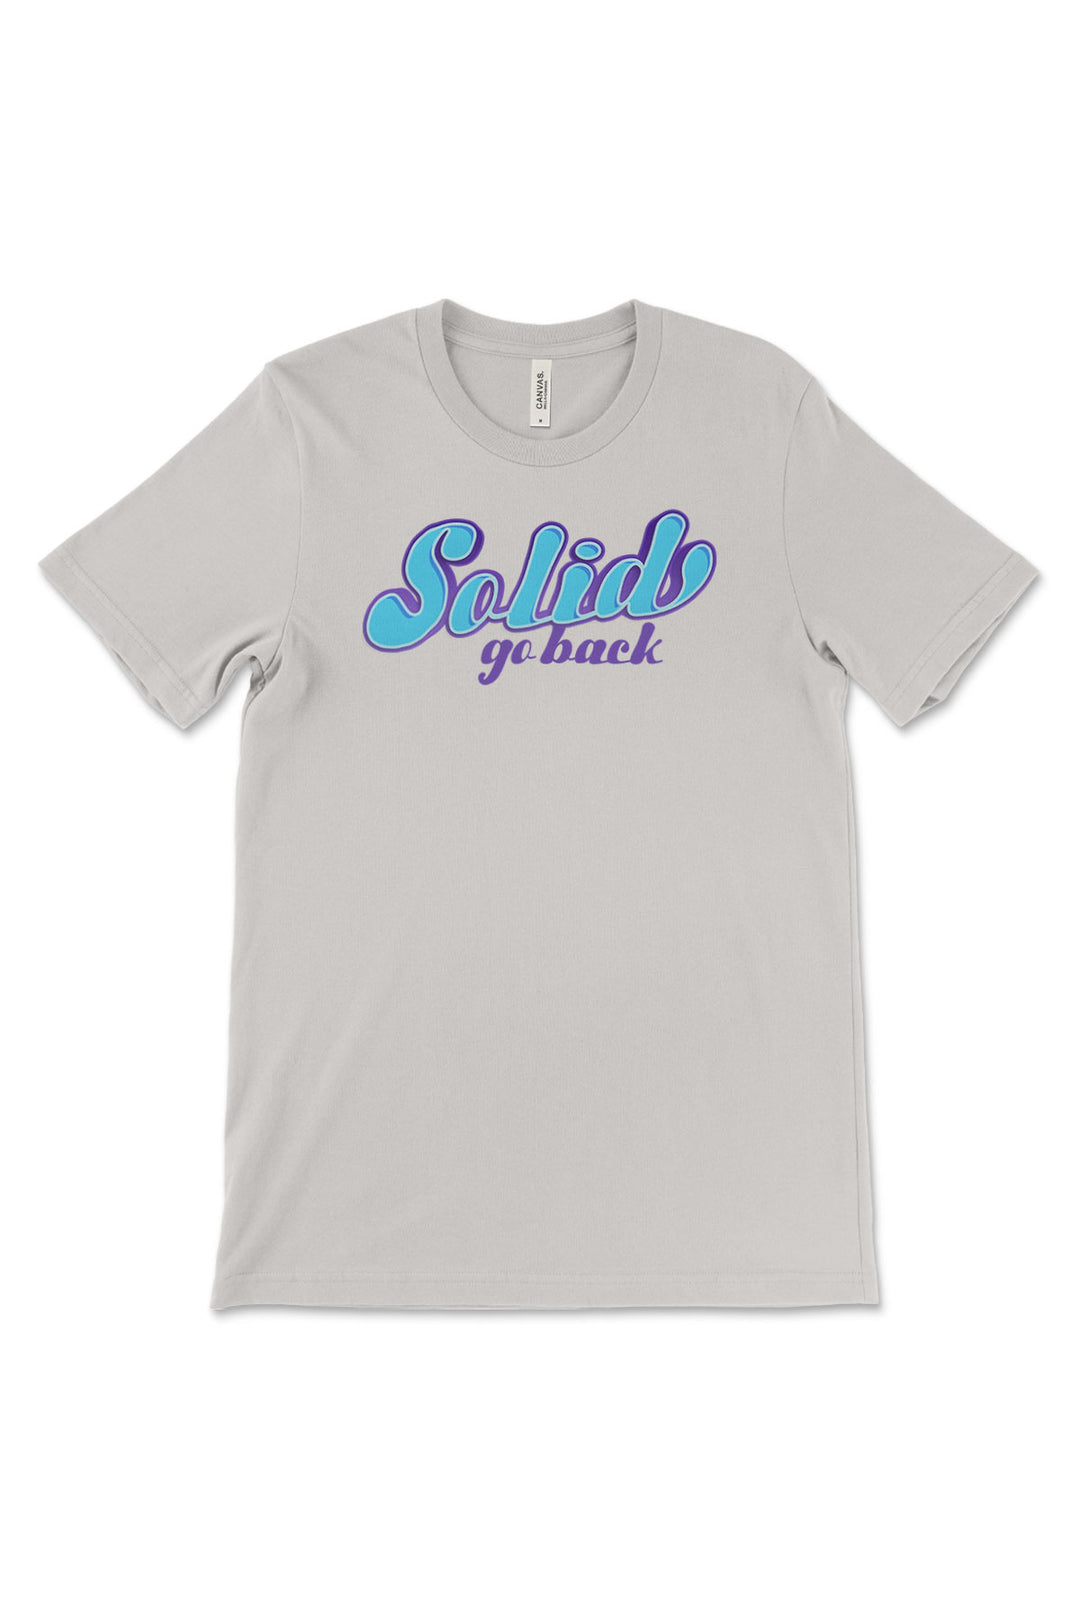 Jersey Tee - Solid Go Back